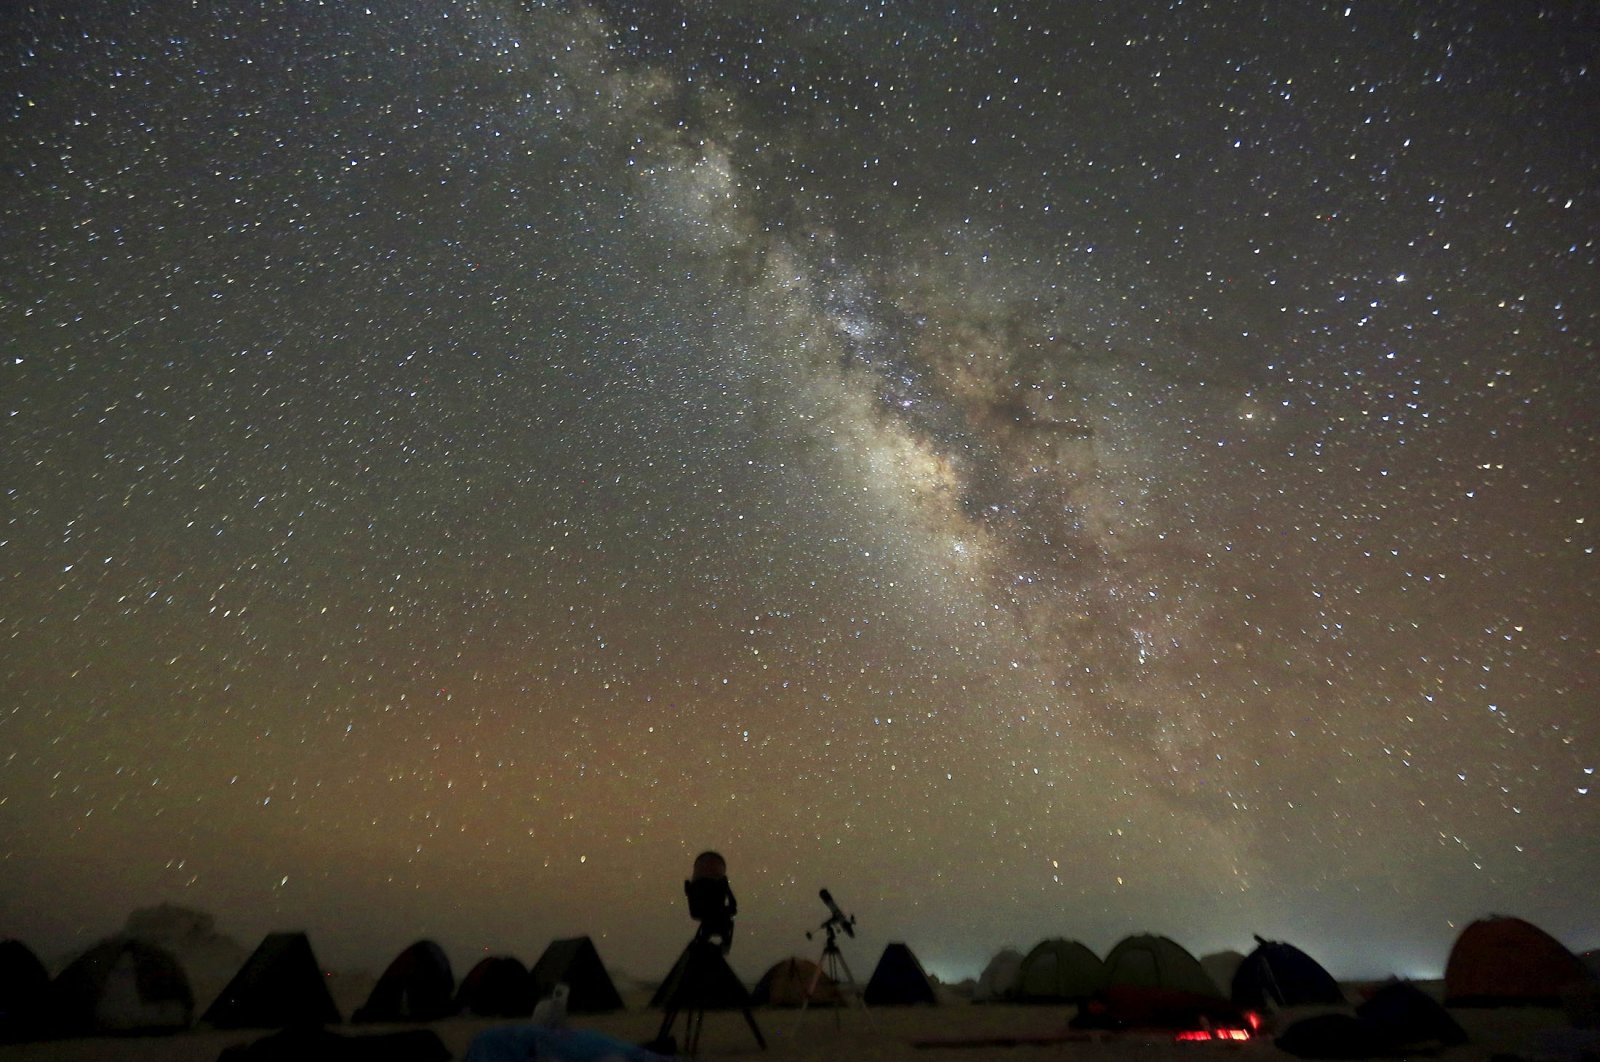 The Milky Way is seen in the night sky around telescopes and camps of people over rocks in the White Desert north of the Farafra Oasis southwest of Cairo, Egypt, May 16, 2015. (Reuters Photo)